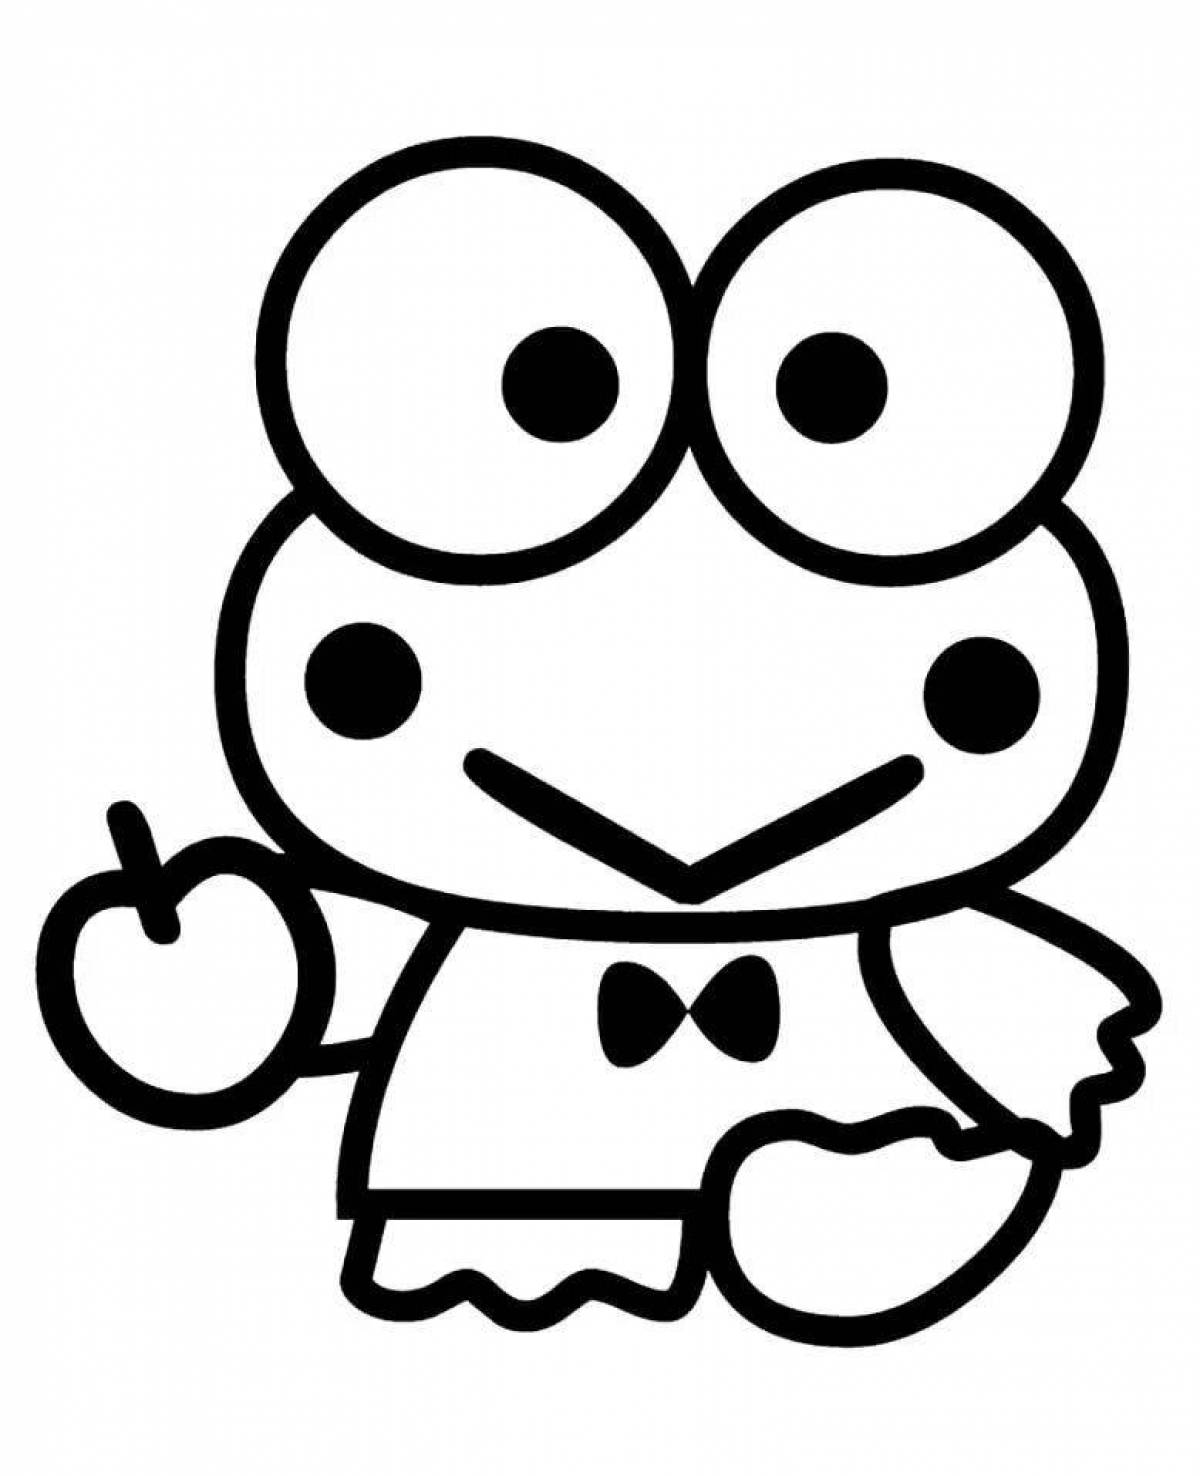 Fabulous hello kitty frog coloring page